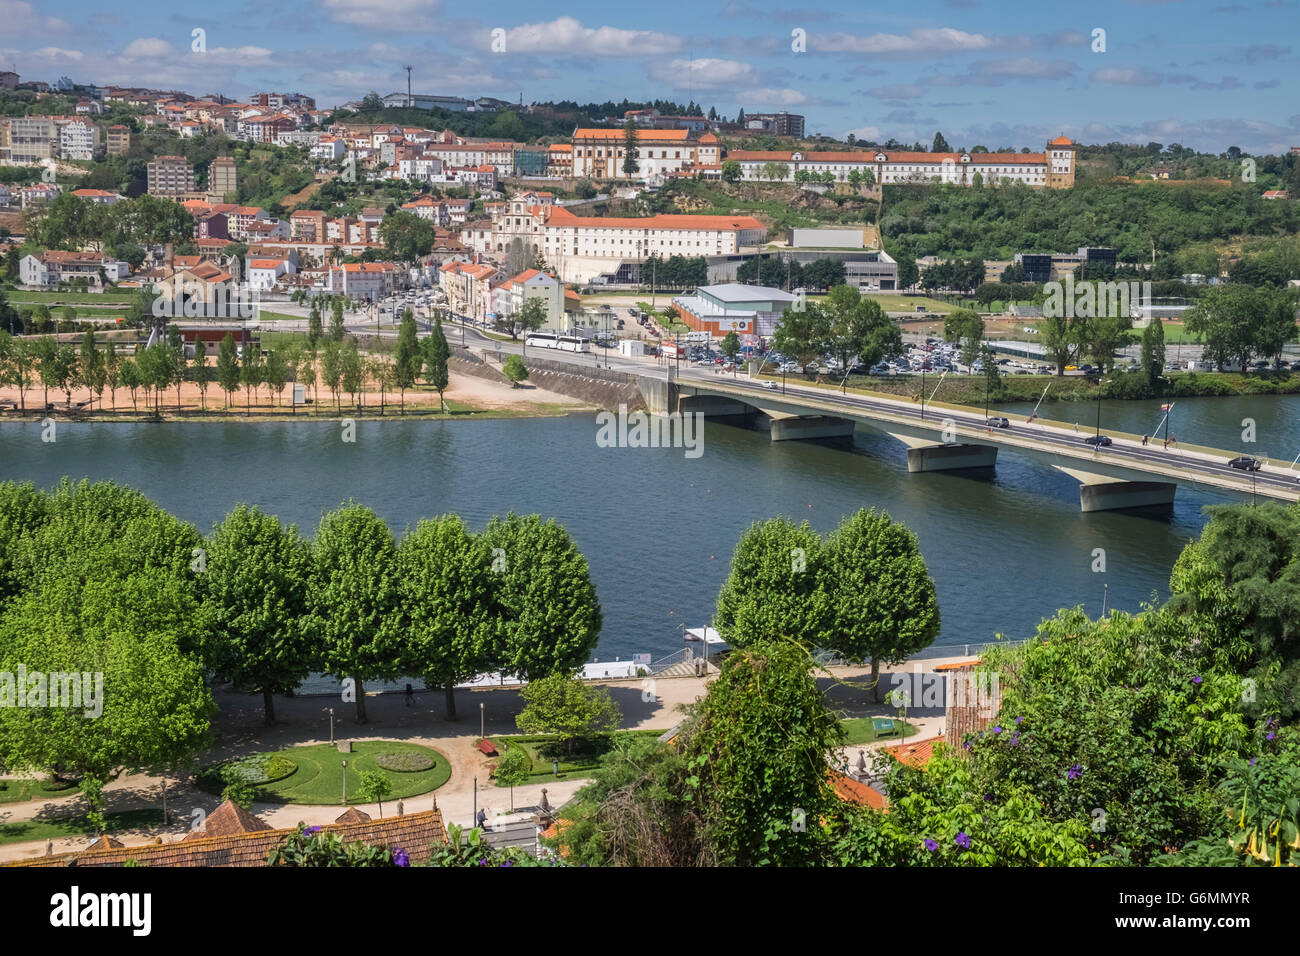 A view of the parish of Santa Clara, Coimbra, Centro Region, Portugal, on the south bank of the Mondego river. Stock Photo